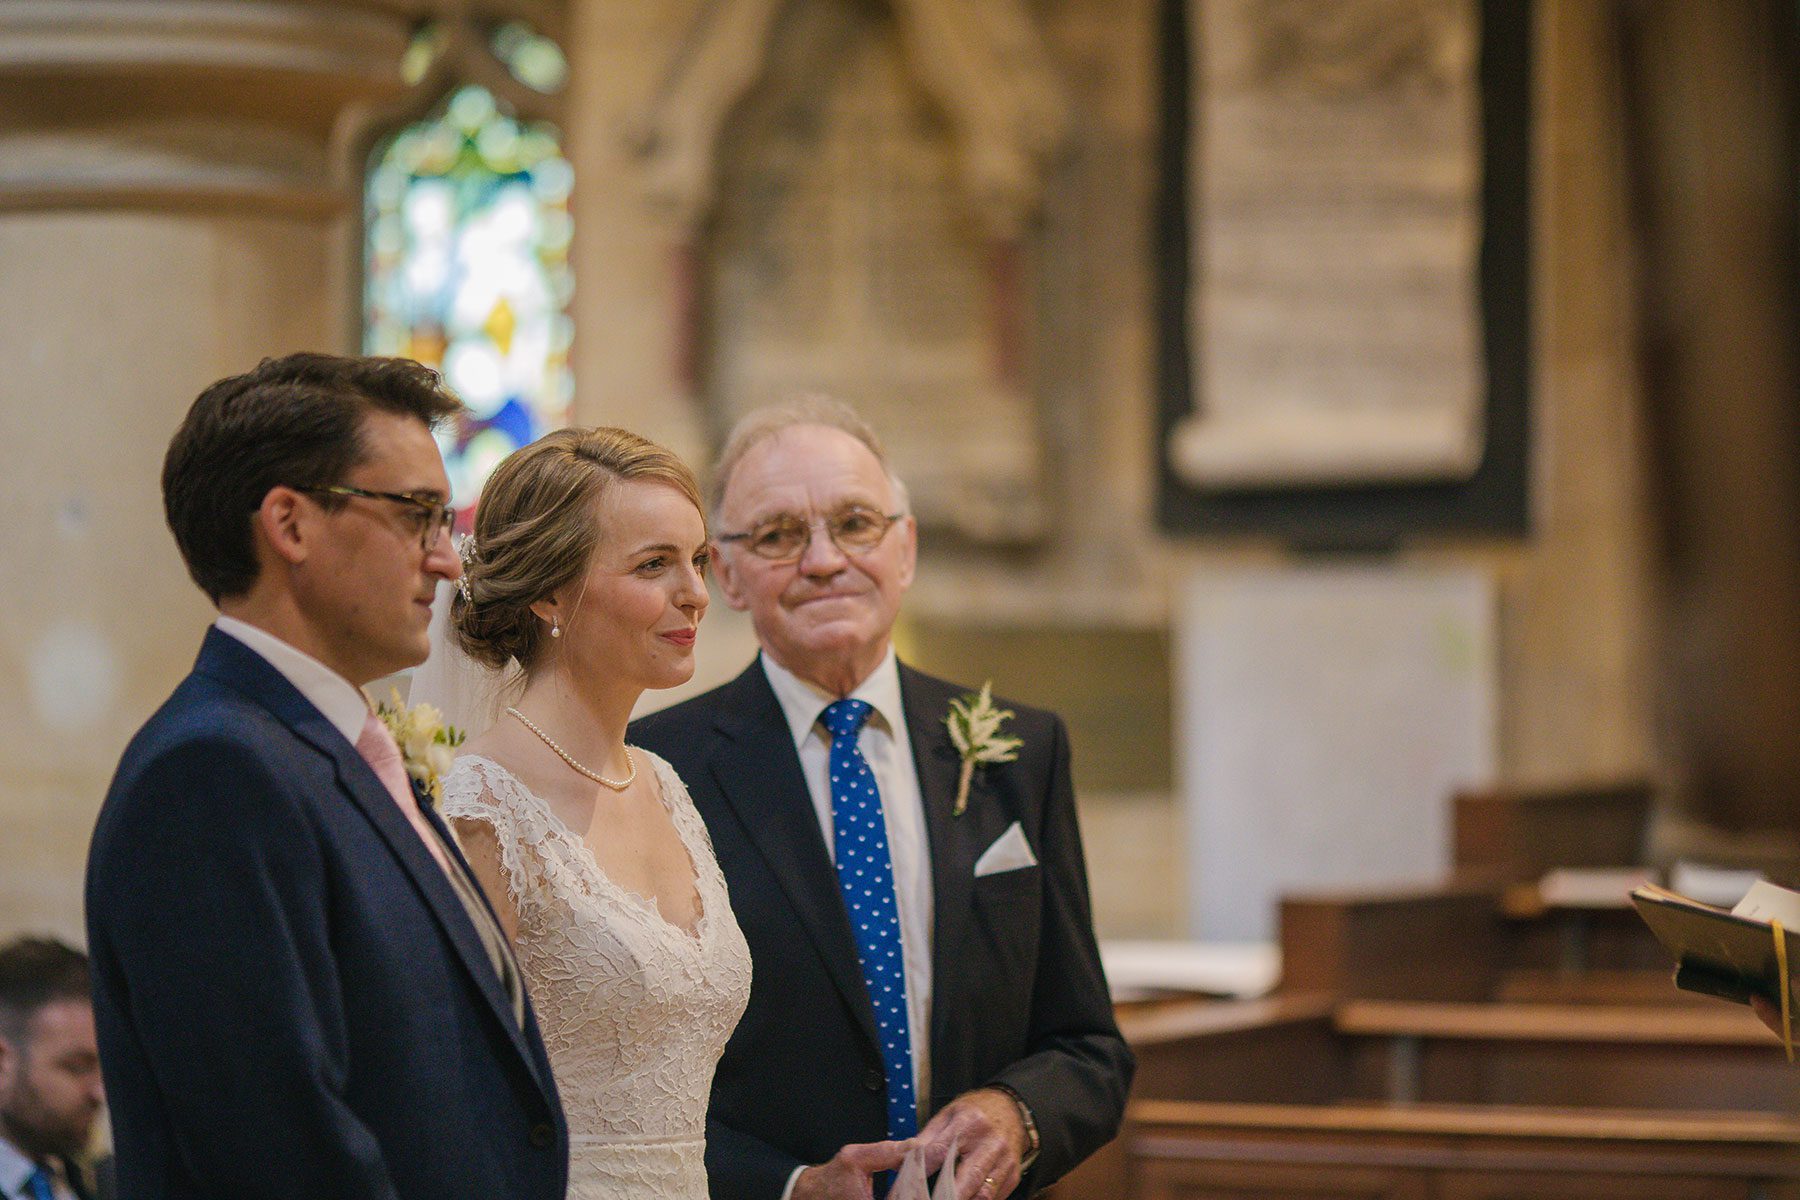 In the church - Reportage Wedding Photography in Cheltenham, Gloucestershire & the Cotswolds | Bullit Photography.